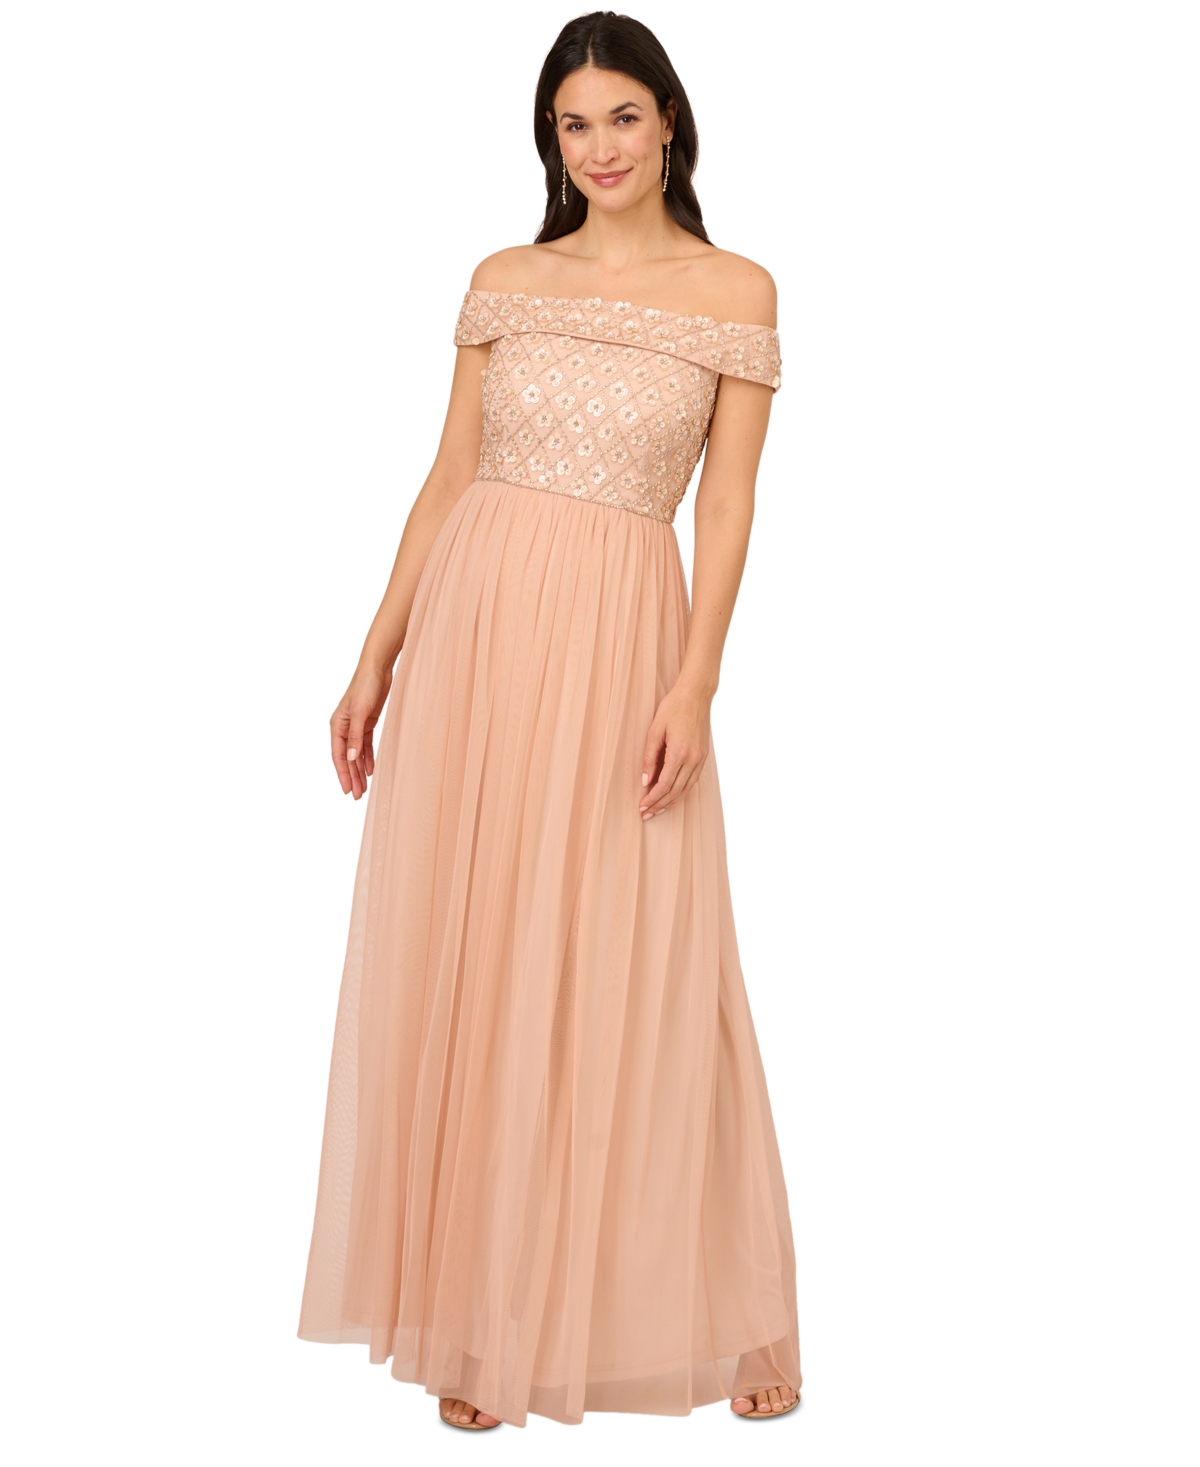 Women's Beaded Off-The-Shoulder Gown - Blush